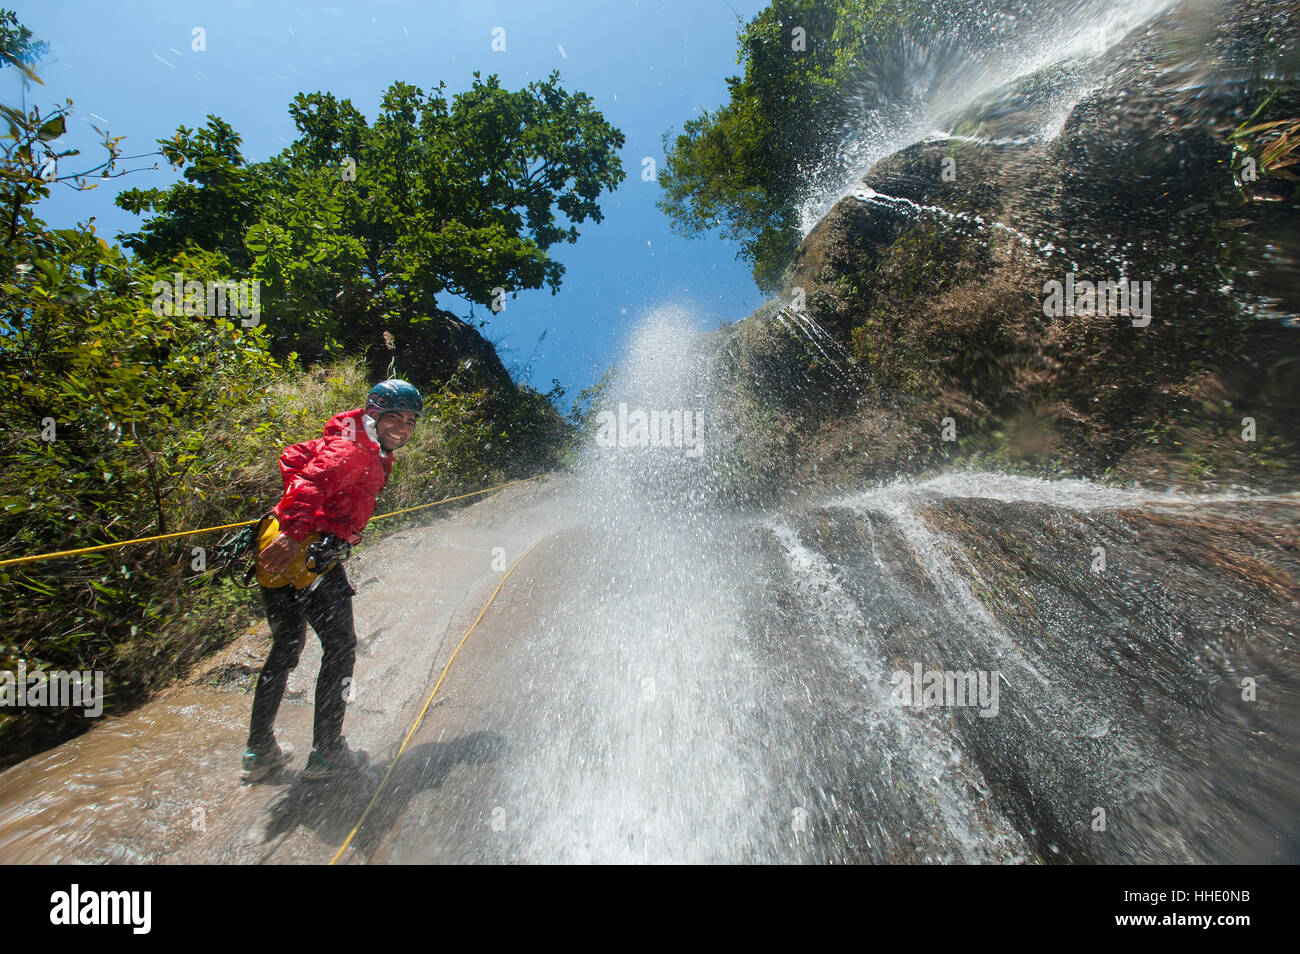 A man pauses to smile for the camera while canyoning in a waterfall, Nepal Stock Photo